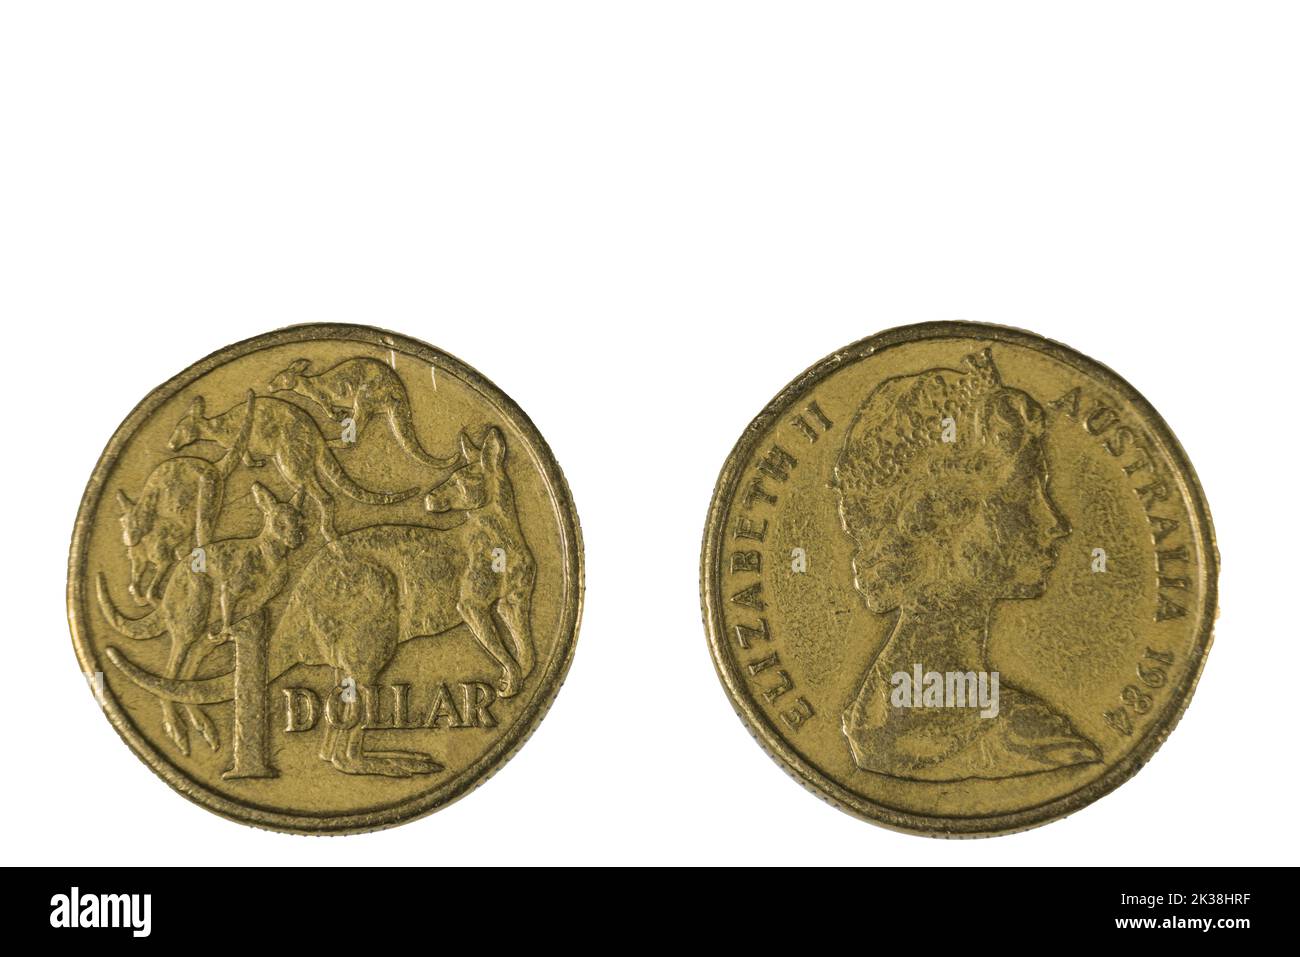 Close up view of front and back side of one dollar Australian coin dated 1988. Numismatic concept. Stock Photo